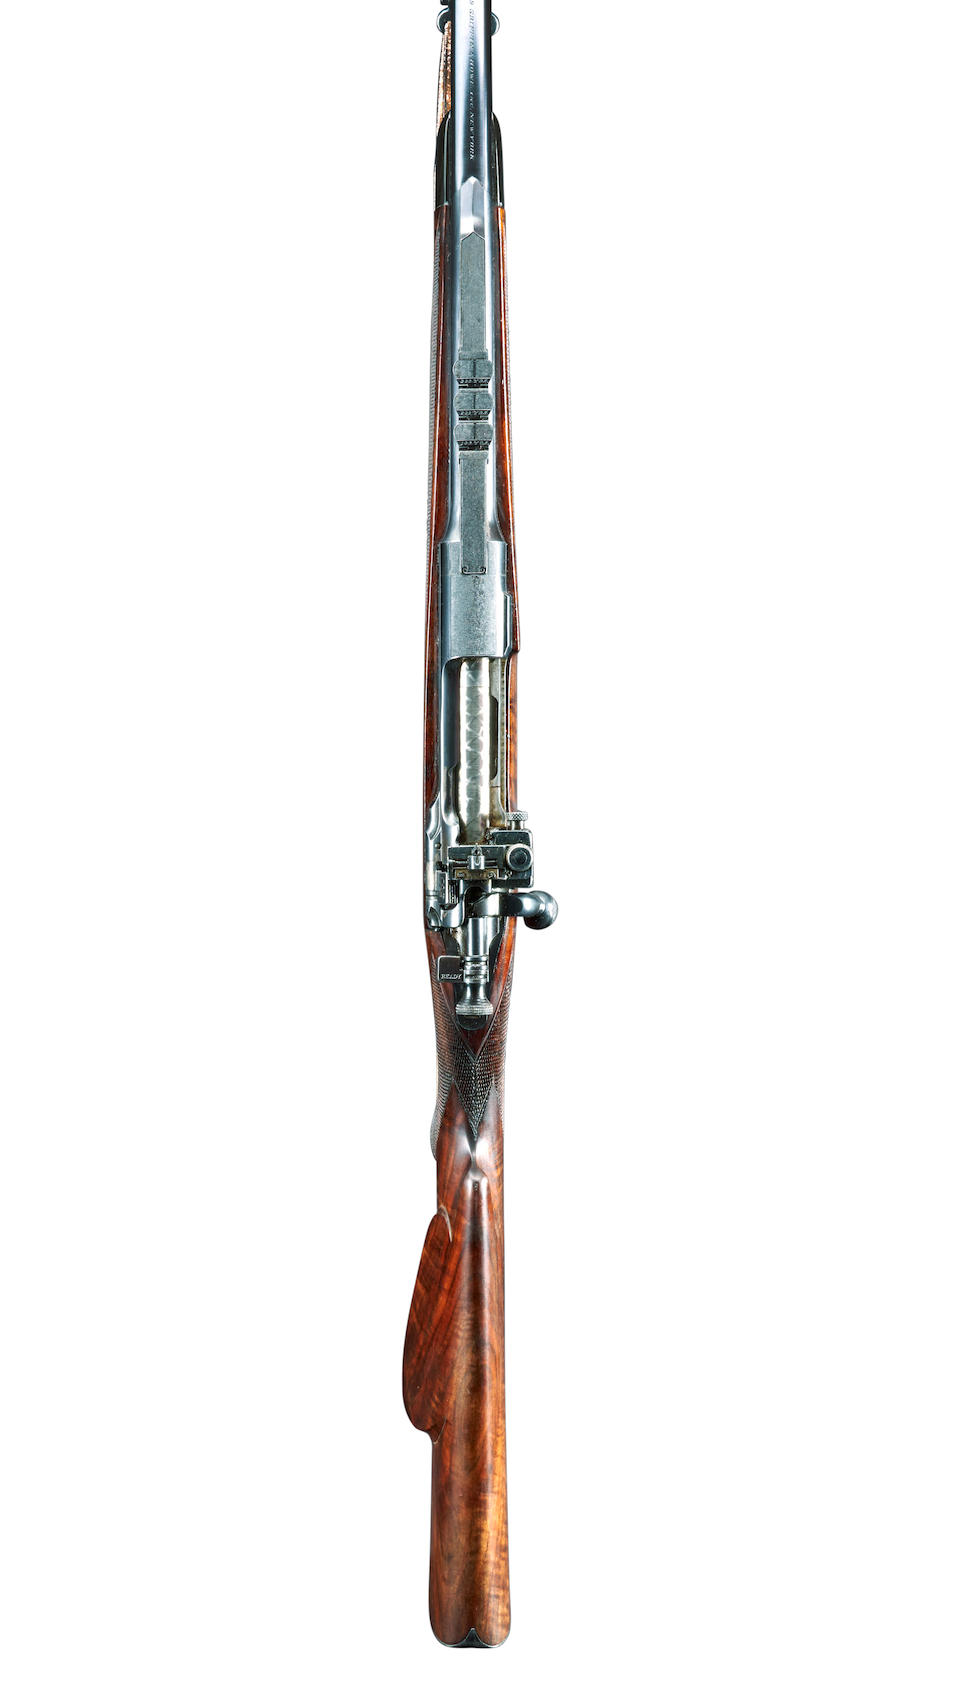 Griffin & Howe Bolt Action Sporting Rifle, Curio or Relic firearm - Image 8 of 8